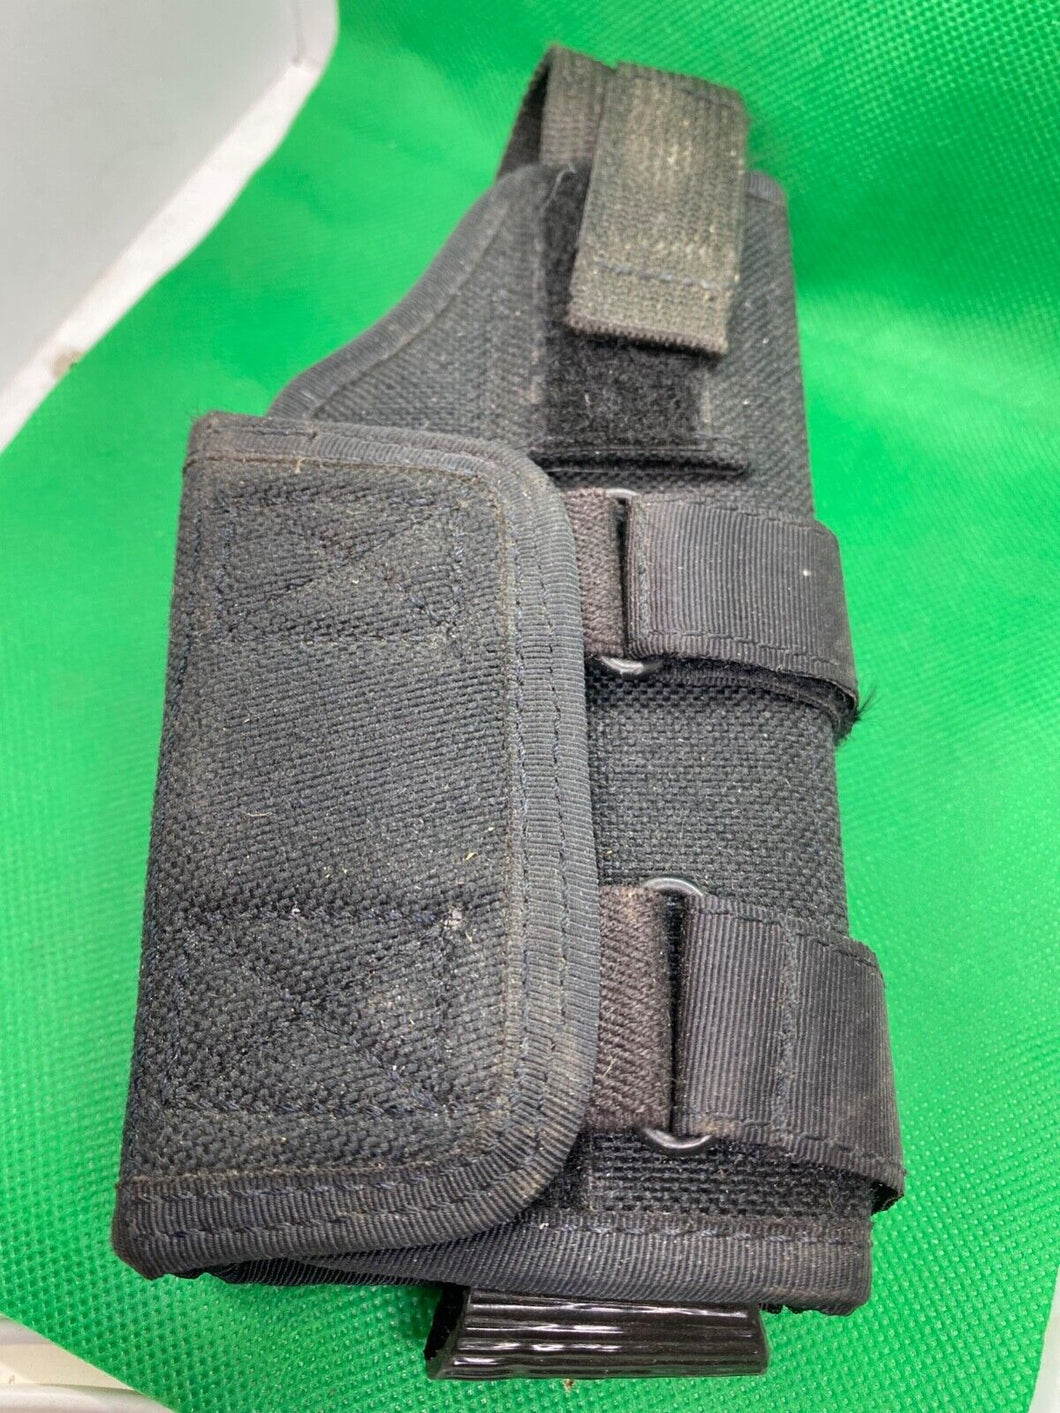 Black Fabric Tactical Belt Mounted GK PRO Pistol Holster  - Ideal for Airsoft